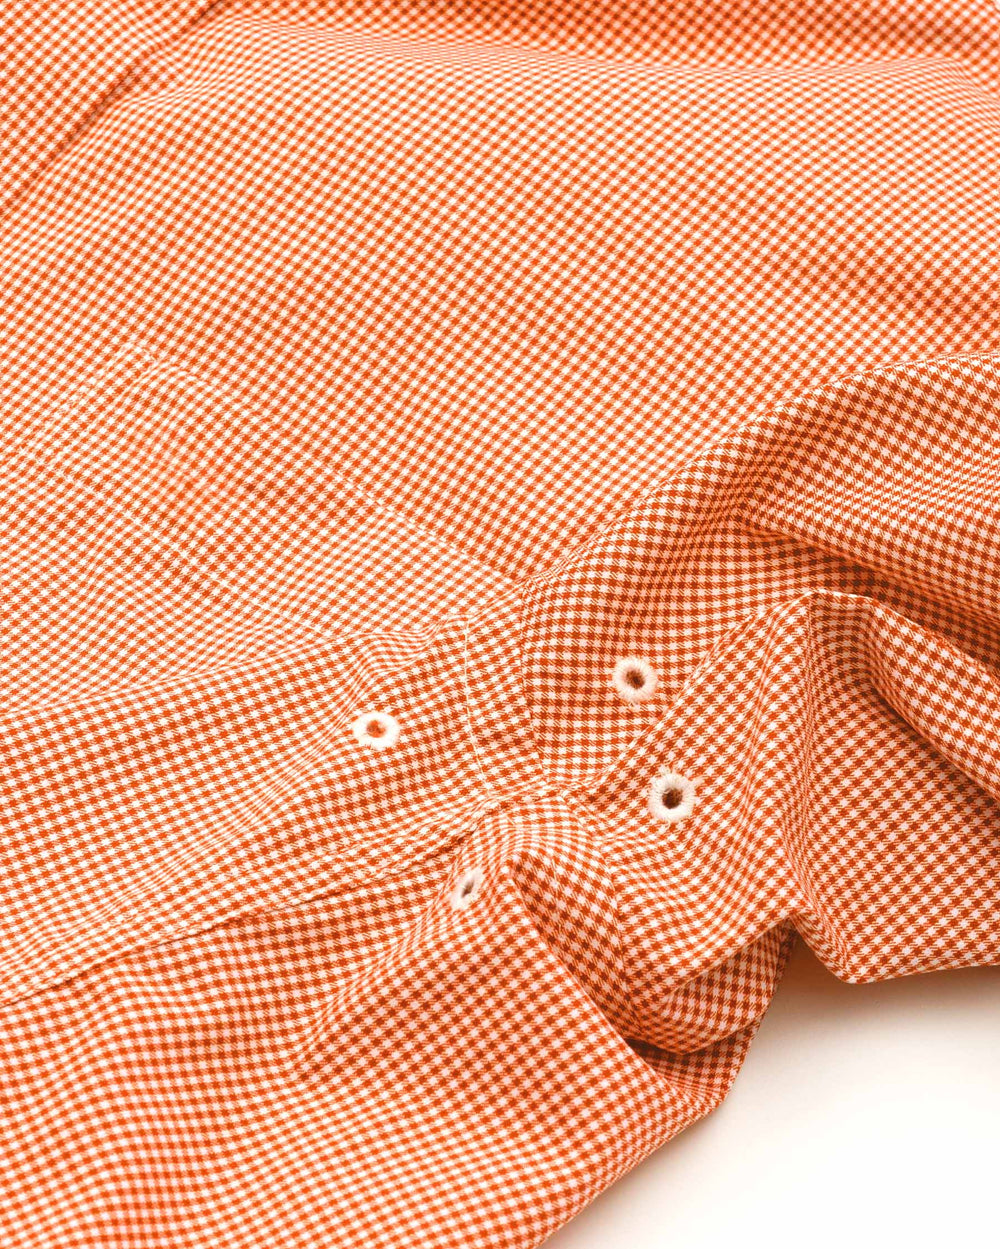 The detail of the Tennessee Vols Gingham Button Down Shirt by Southern Tide - Rocky Top Orange